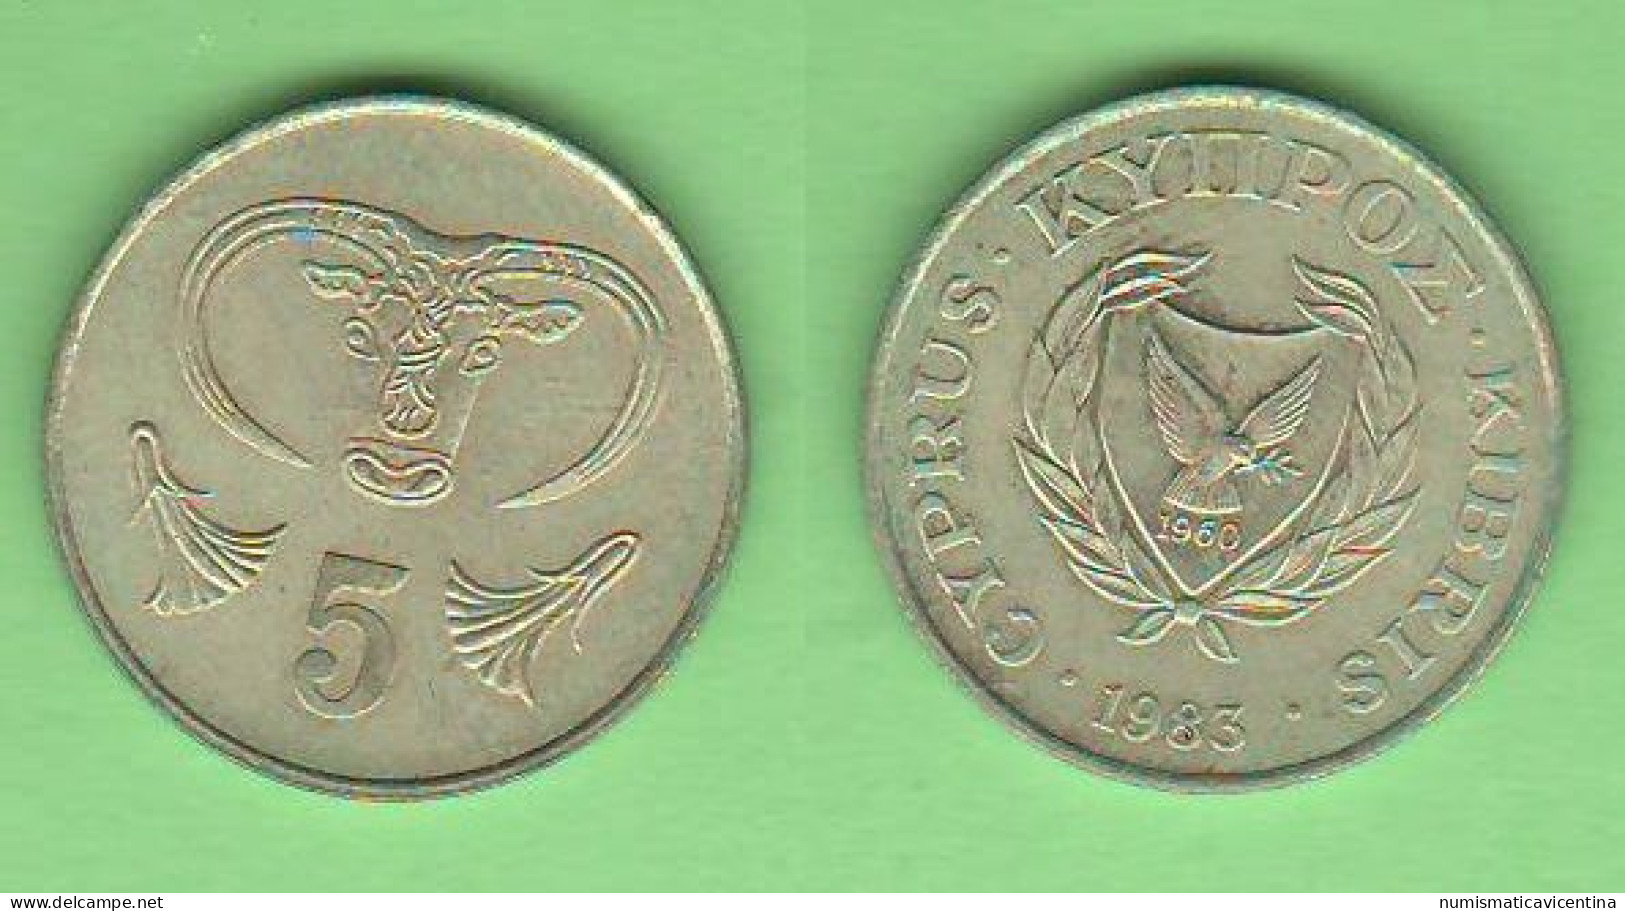 Cipro 5 Cents 1983 Cyprus Chipre Chypre - Cyprus